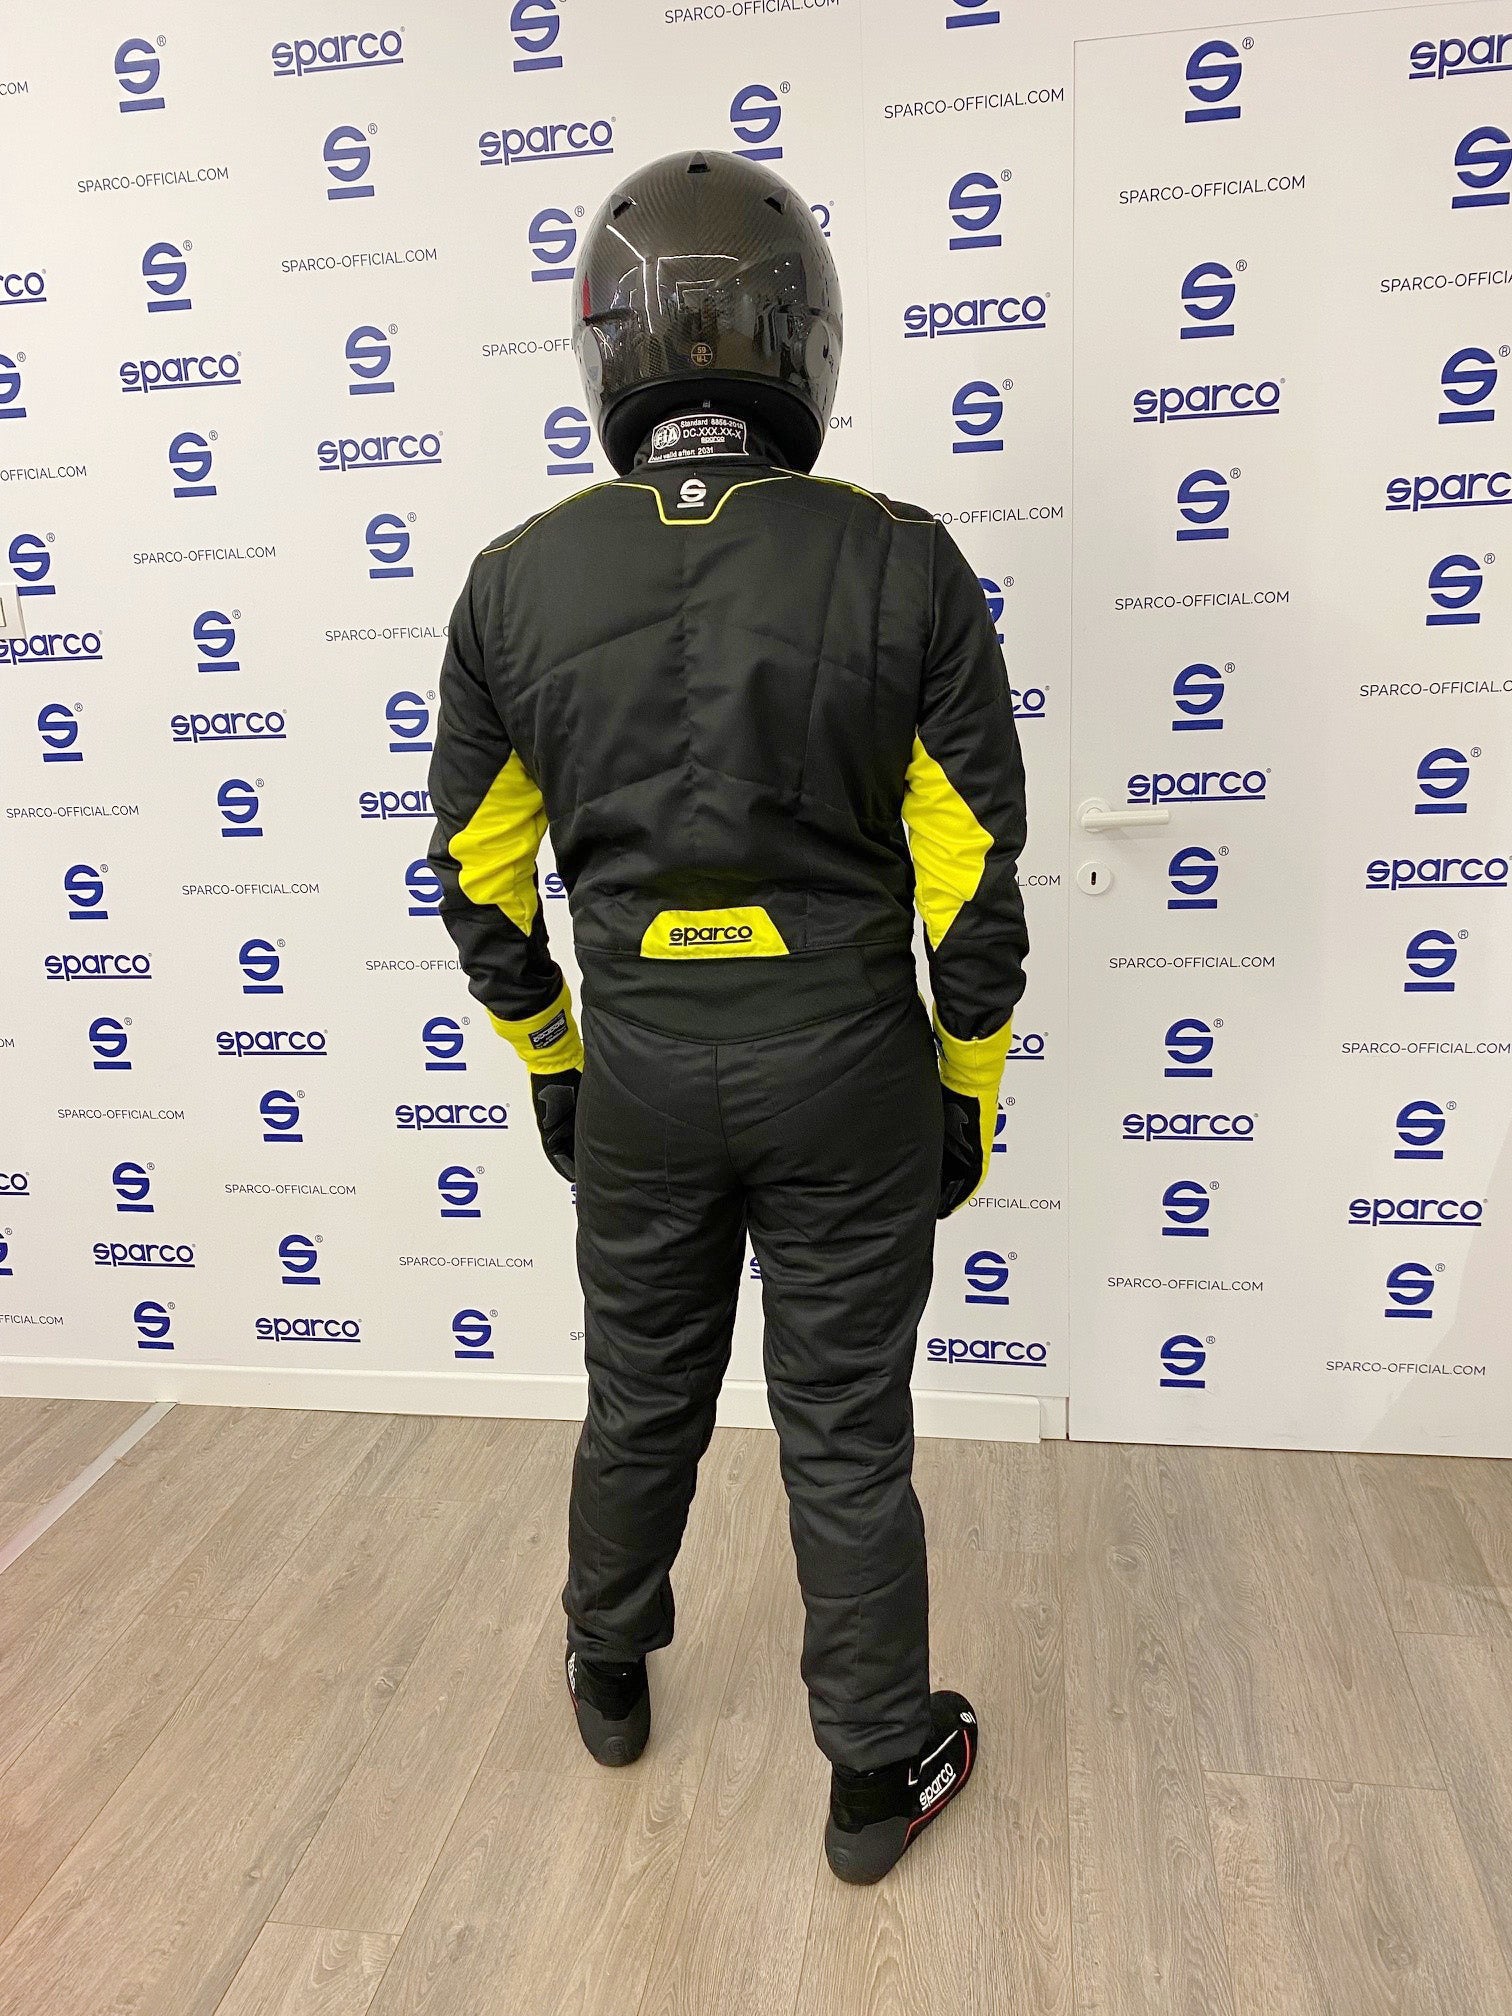 SPARCO 00109354NRGF SPRINT 2022 Racing suit, FIA 8856-2018, black/yellow, size 54 Photo-2 